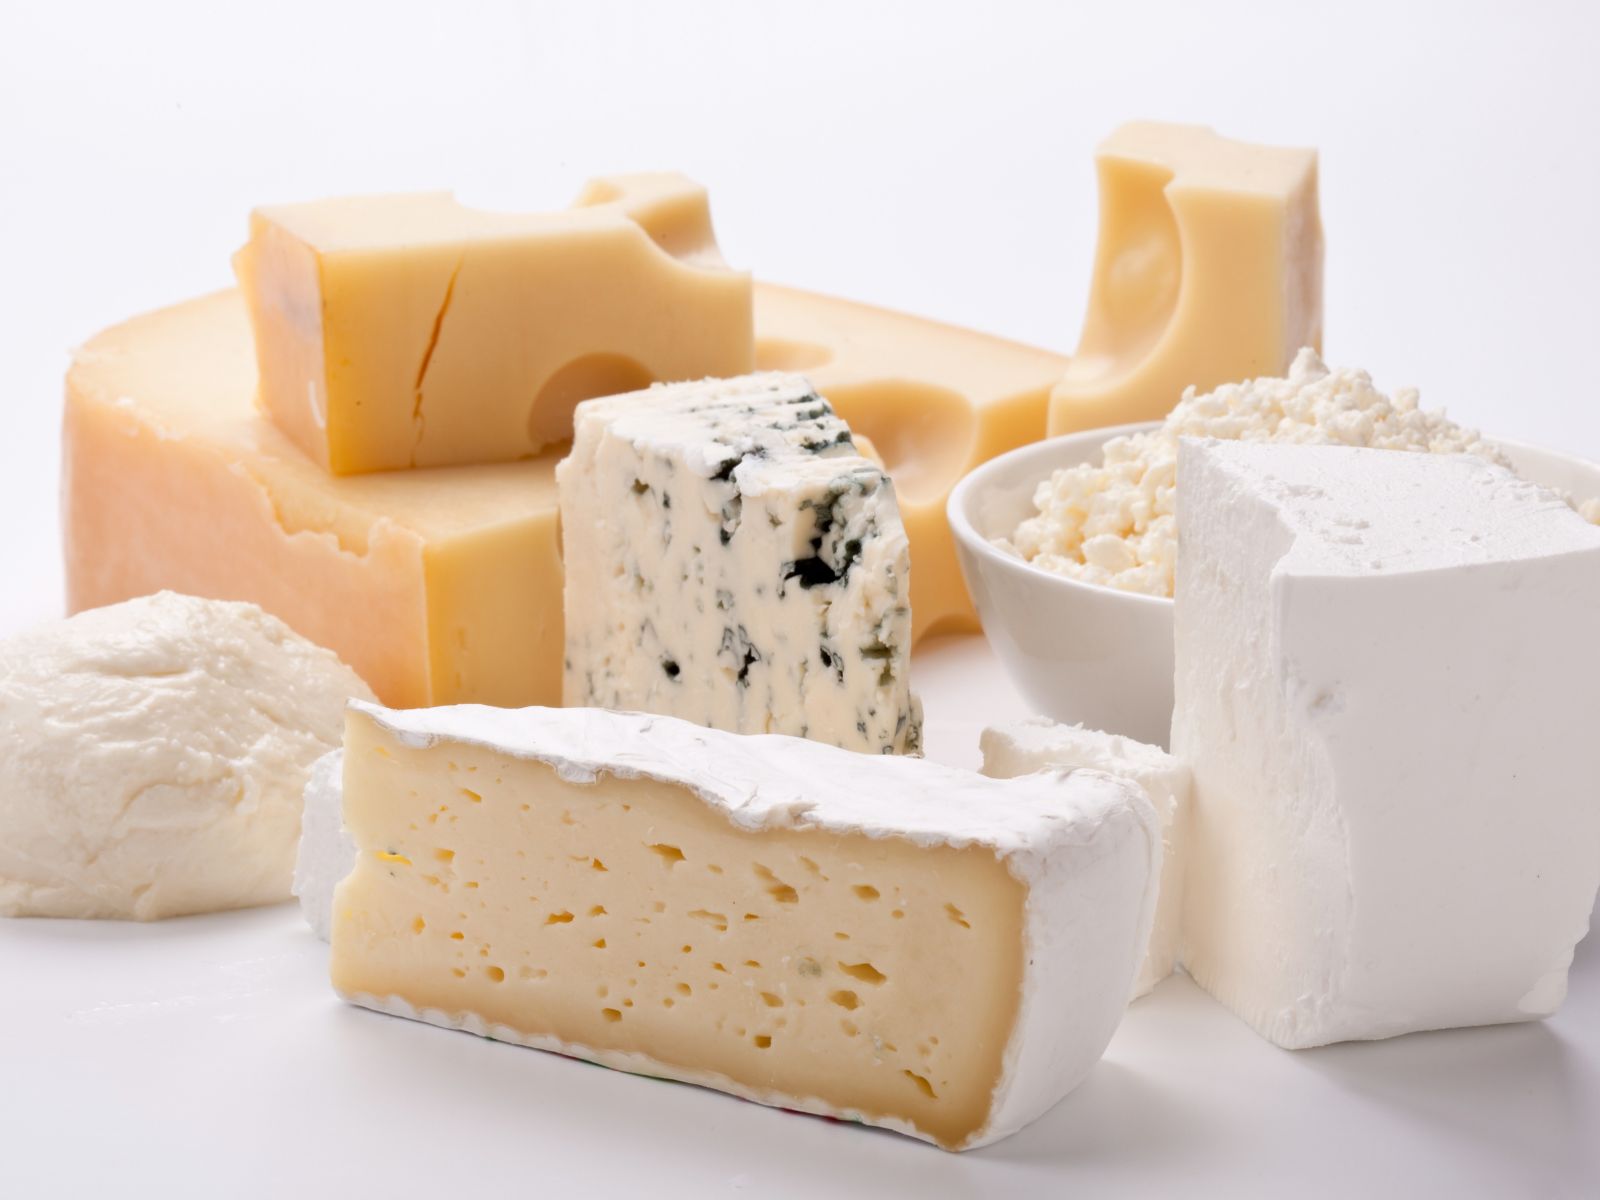 Many different types of cheese on a white surface